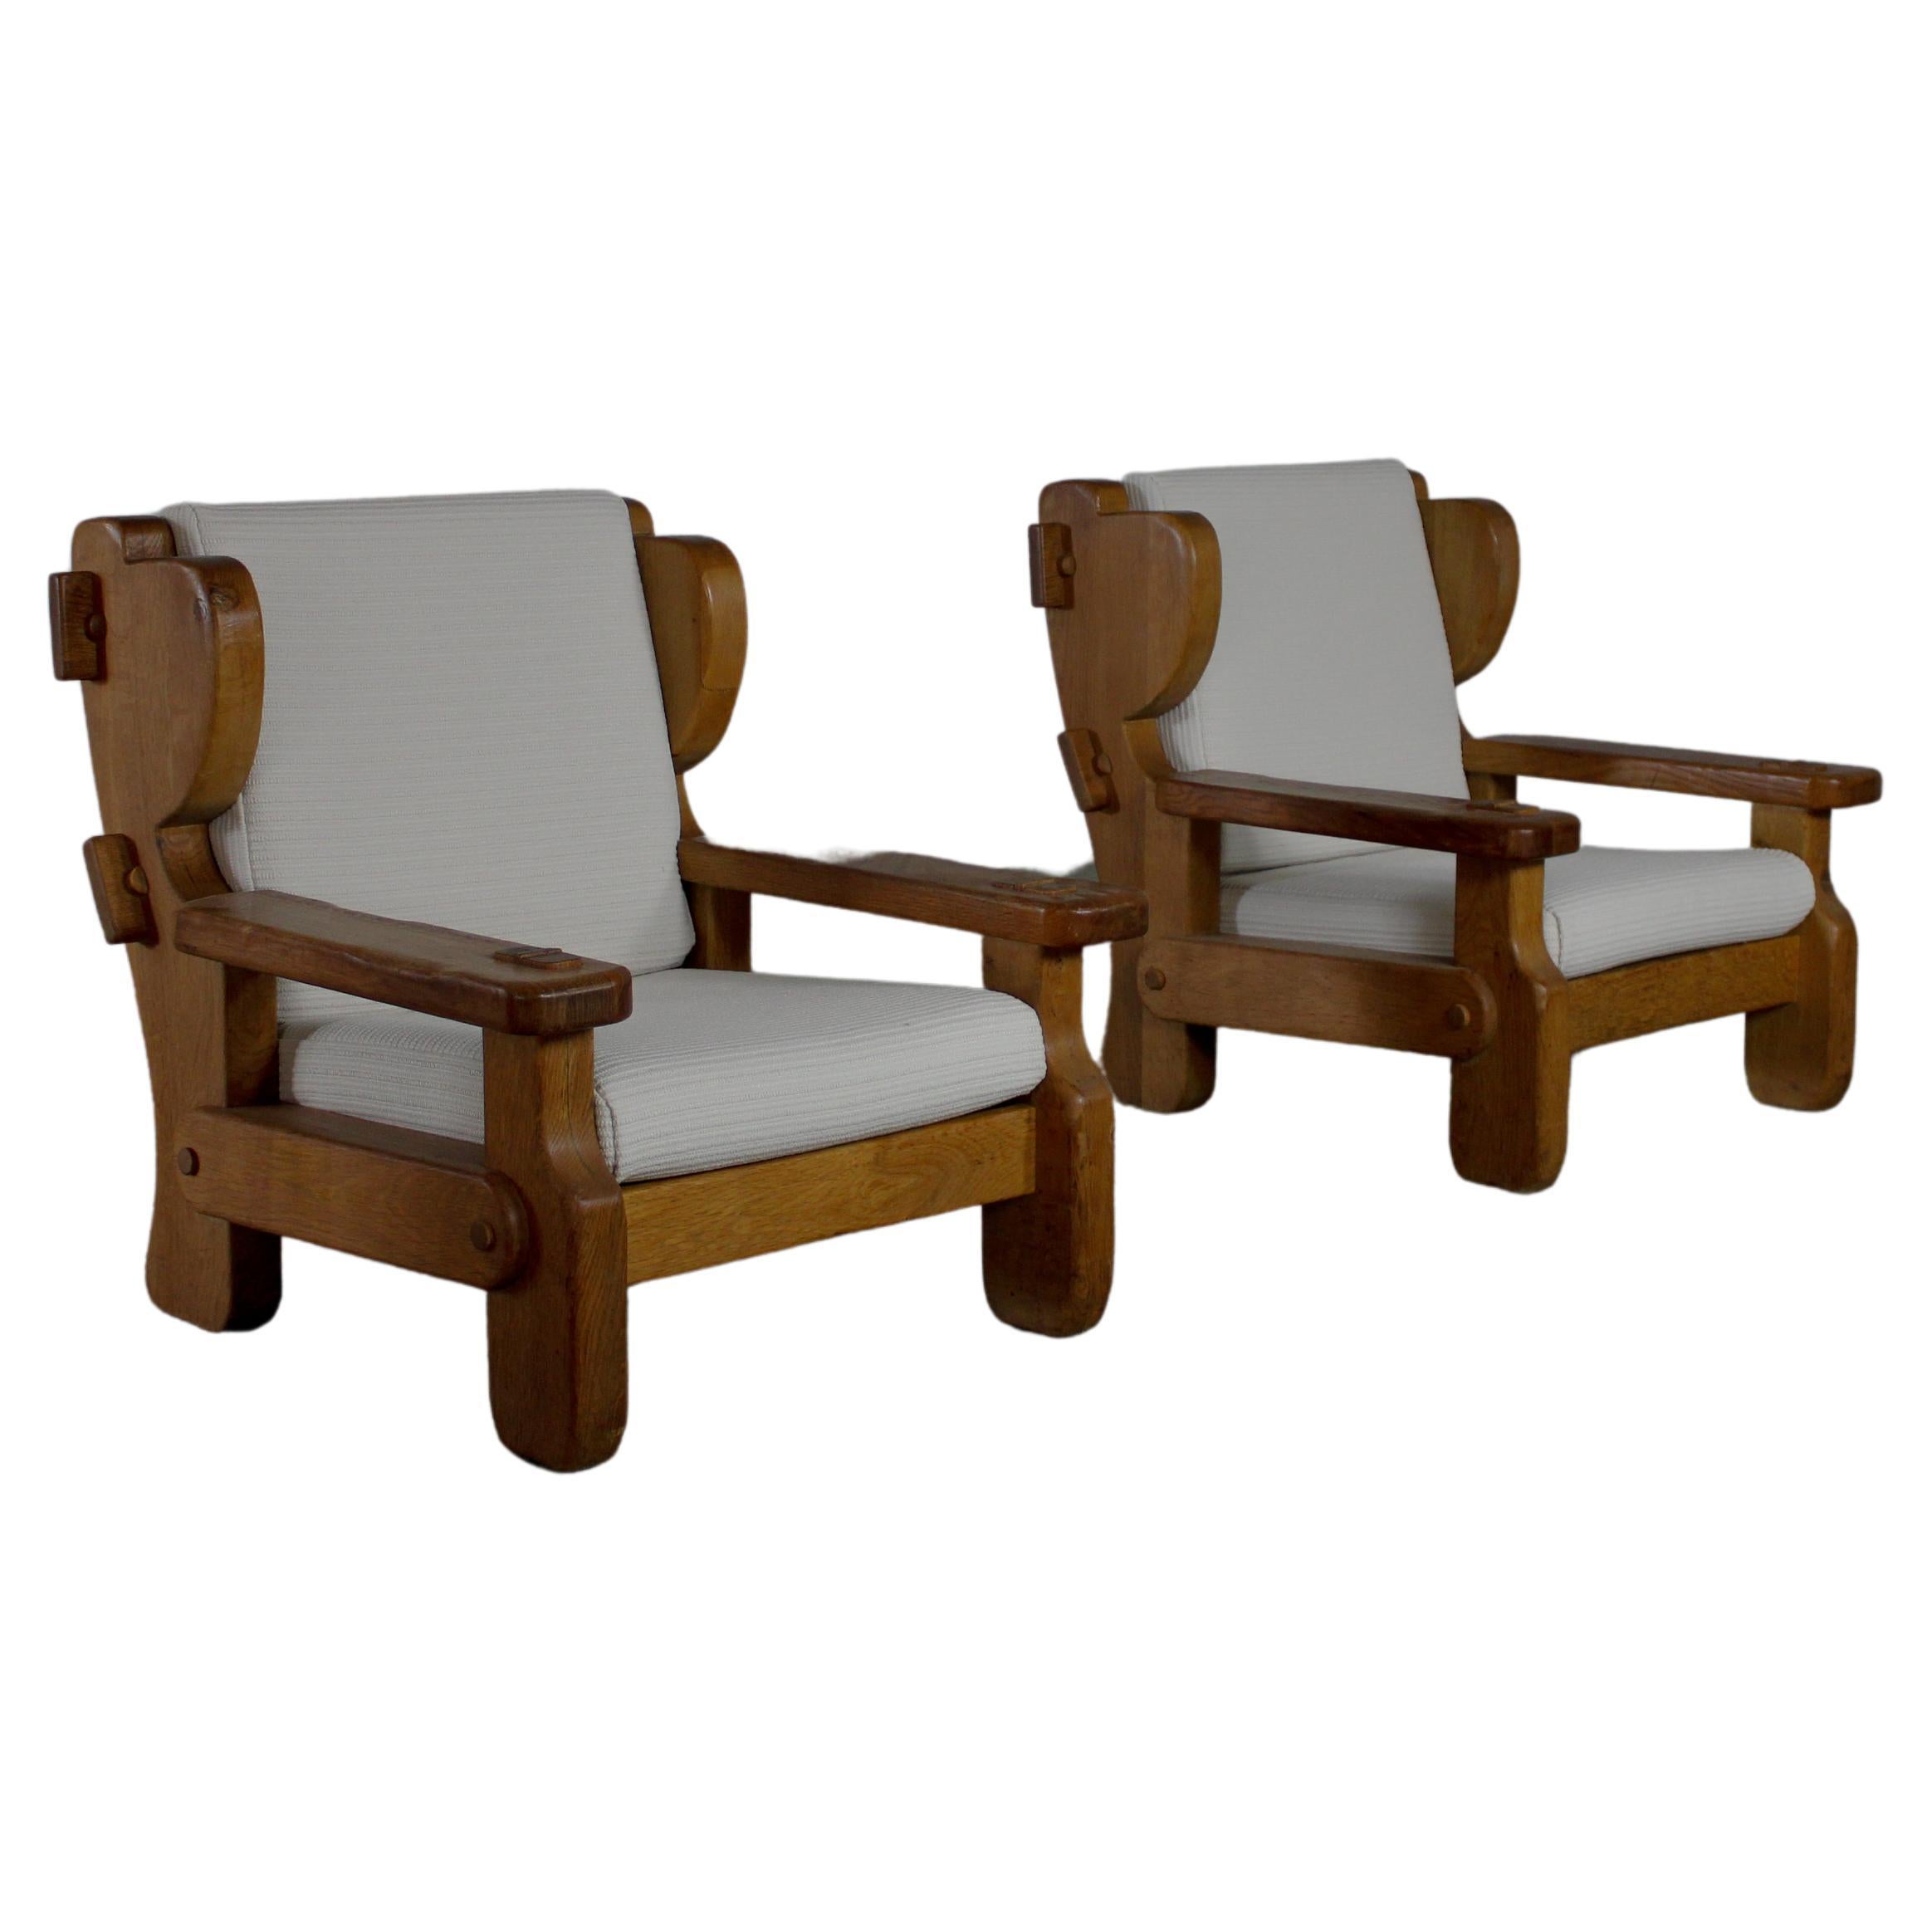 Rustic Lounge chairs, Belgium 1970s For Sale